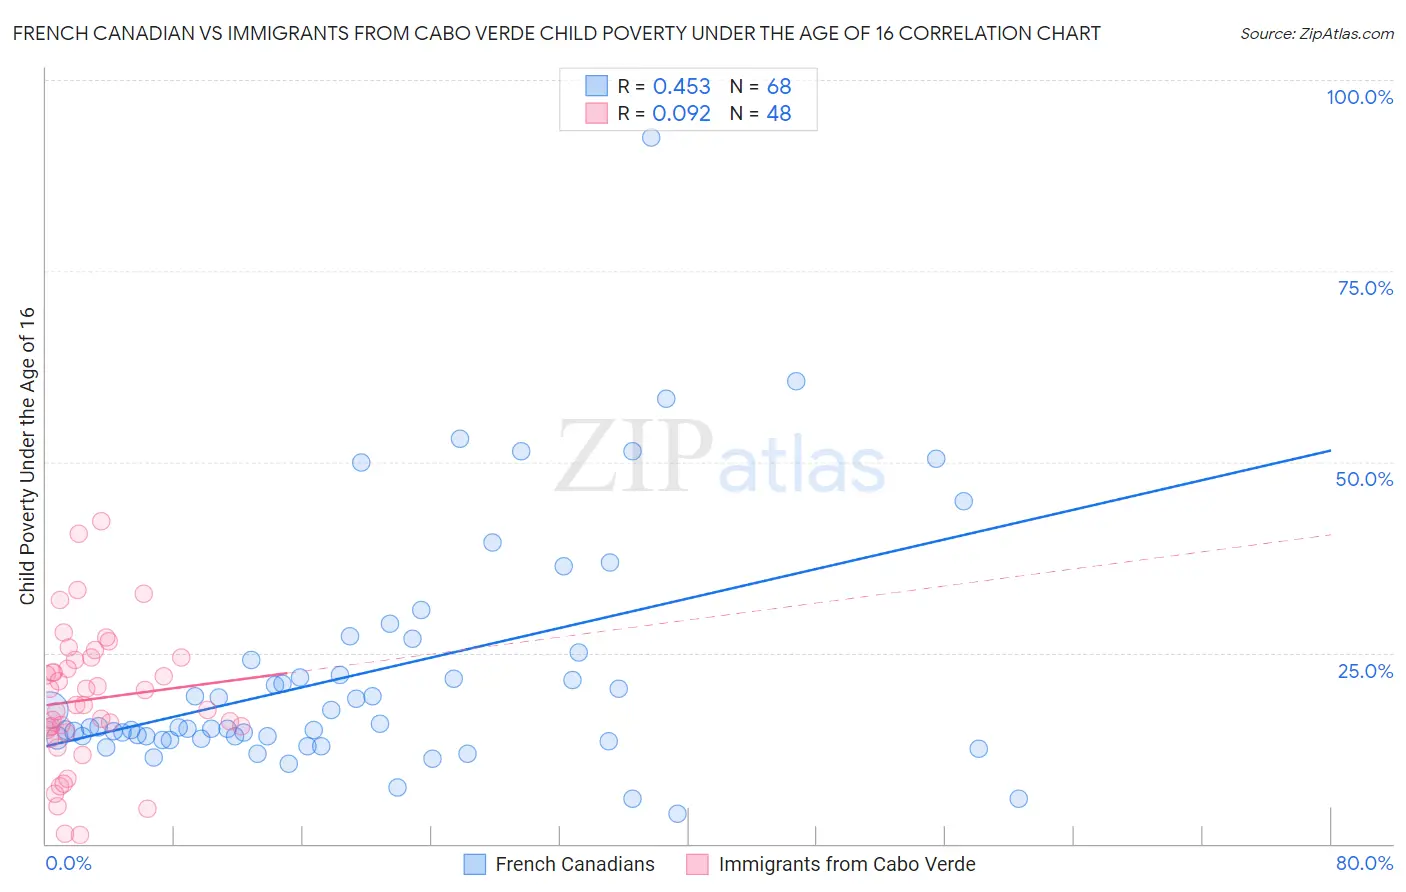 French Canadian vs Immigrants from Cabo Verde Child Poverty Under the Age of 16